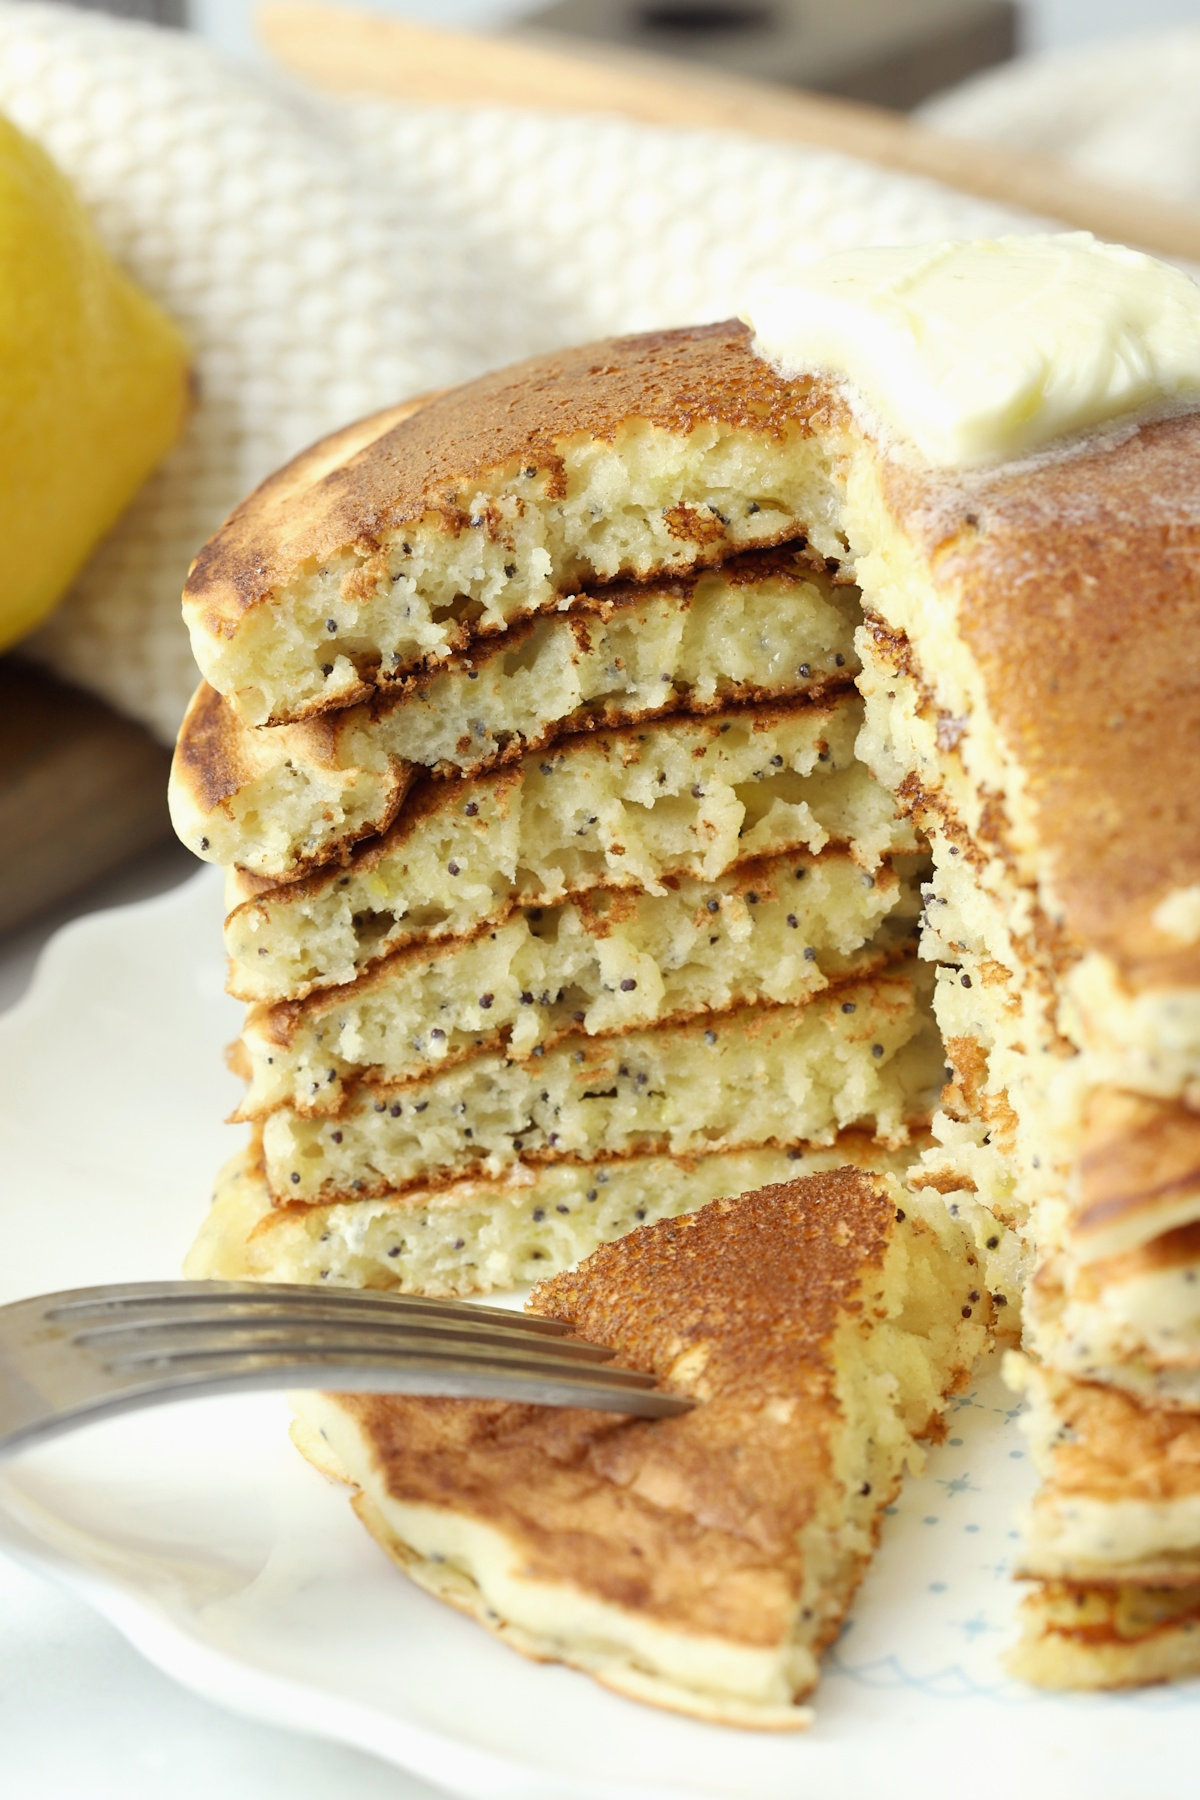 A stack of pancakes sliced into to show layers and poppy seeds inside.